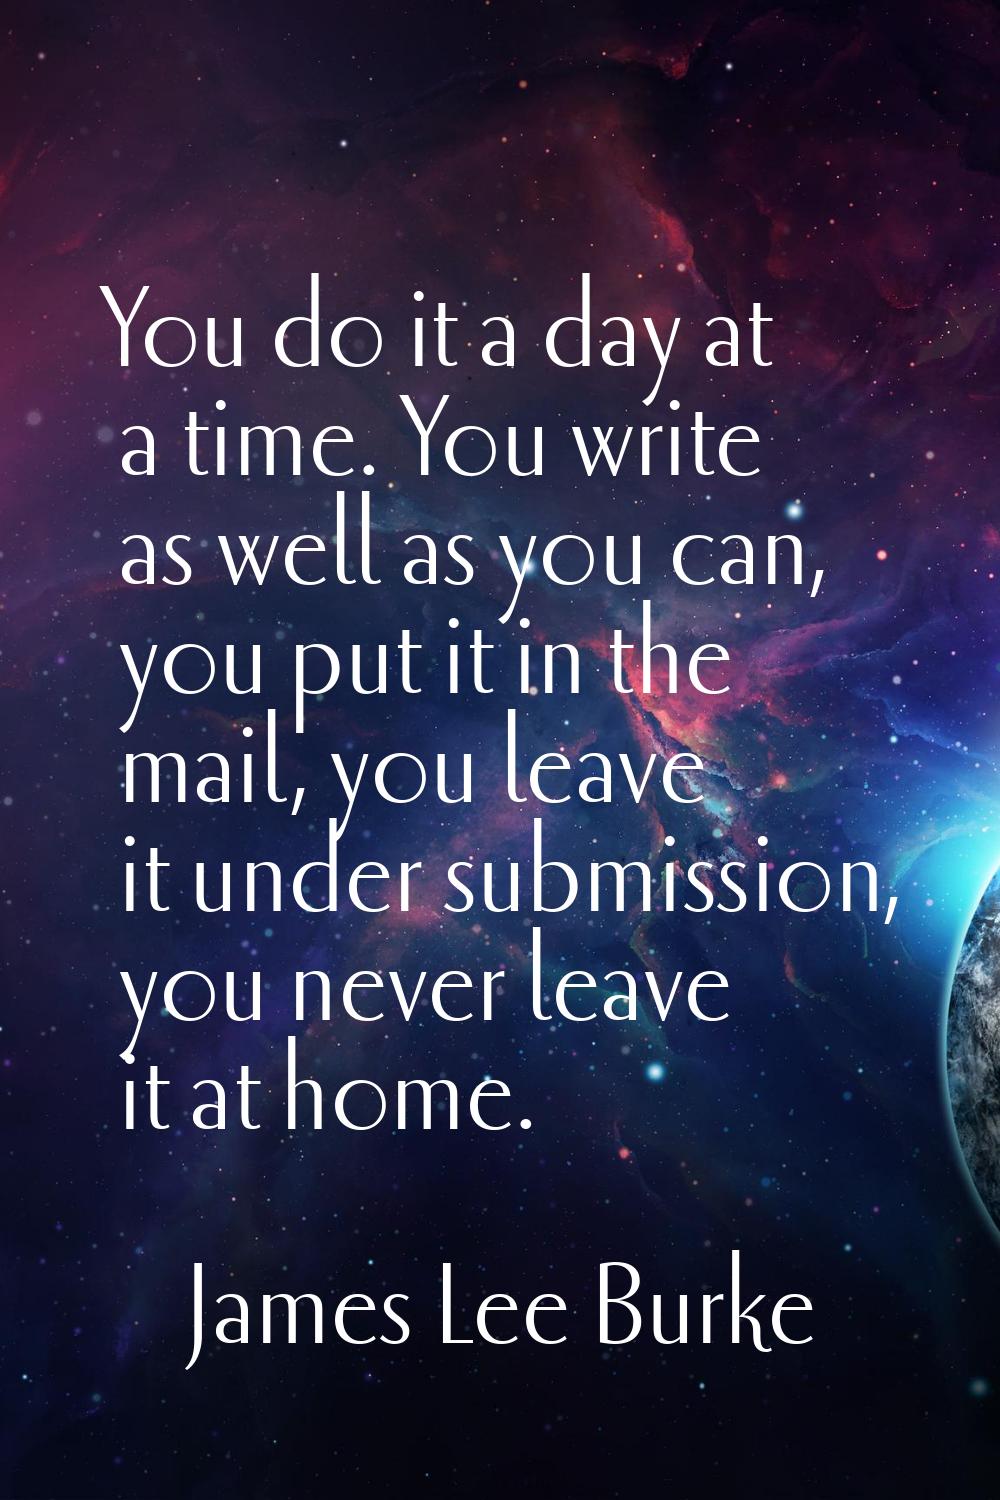 You do it a day at a time. You write as well as you can, you put it in the mail, you leave it under